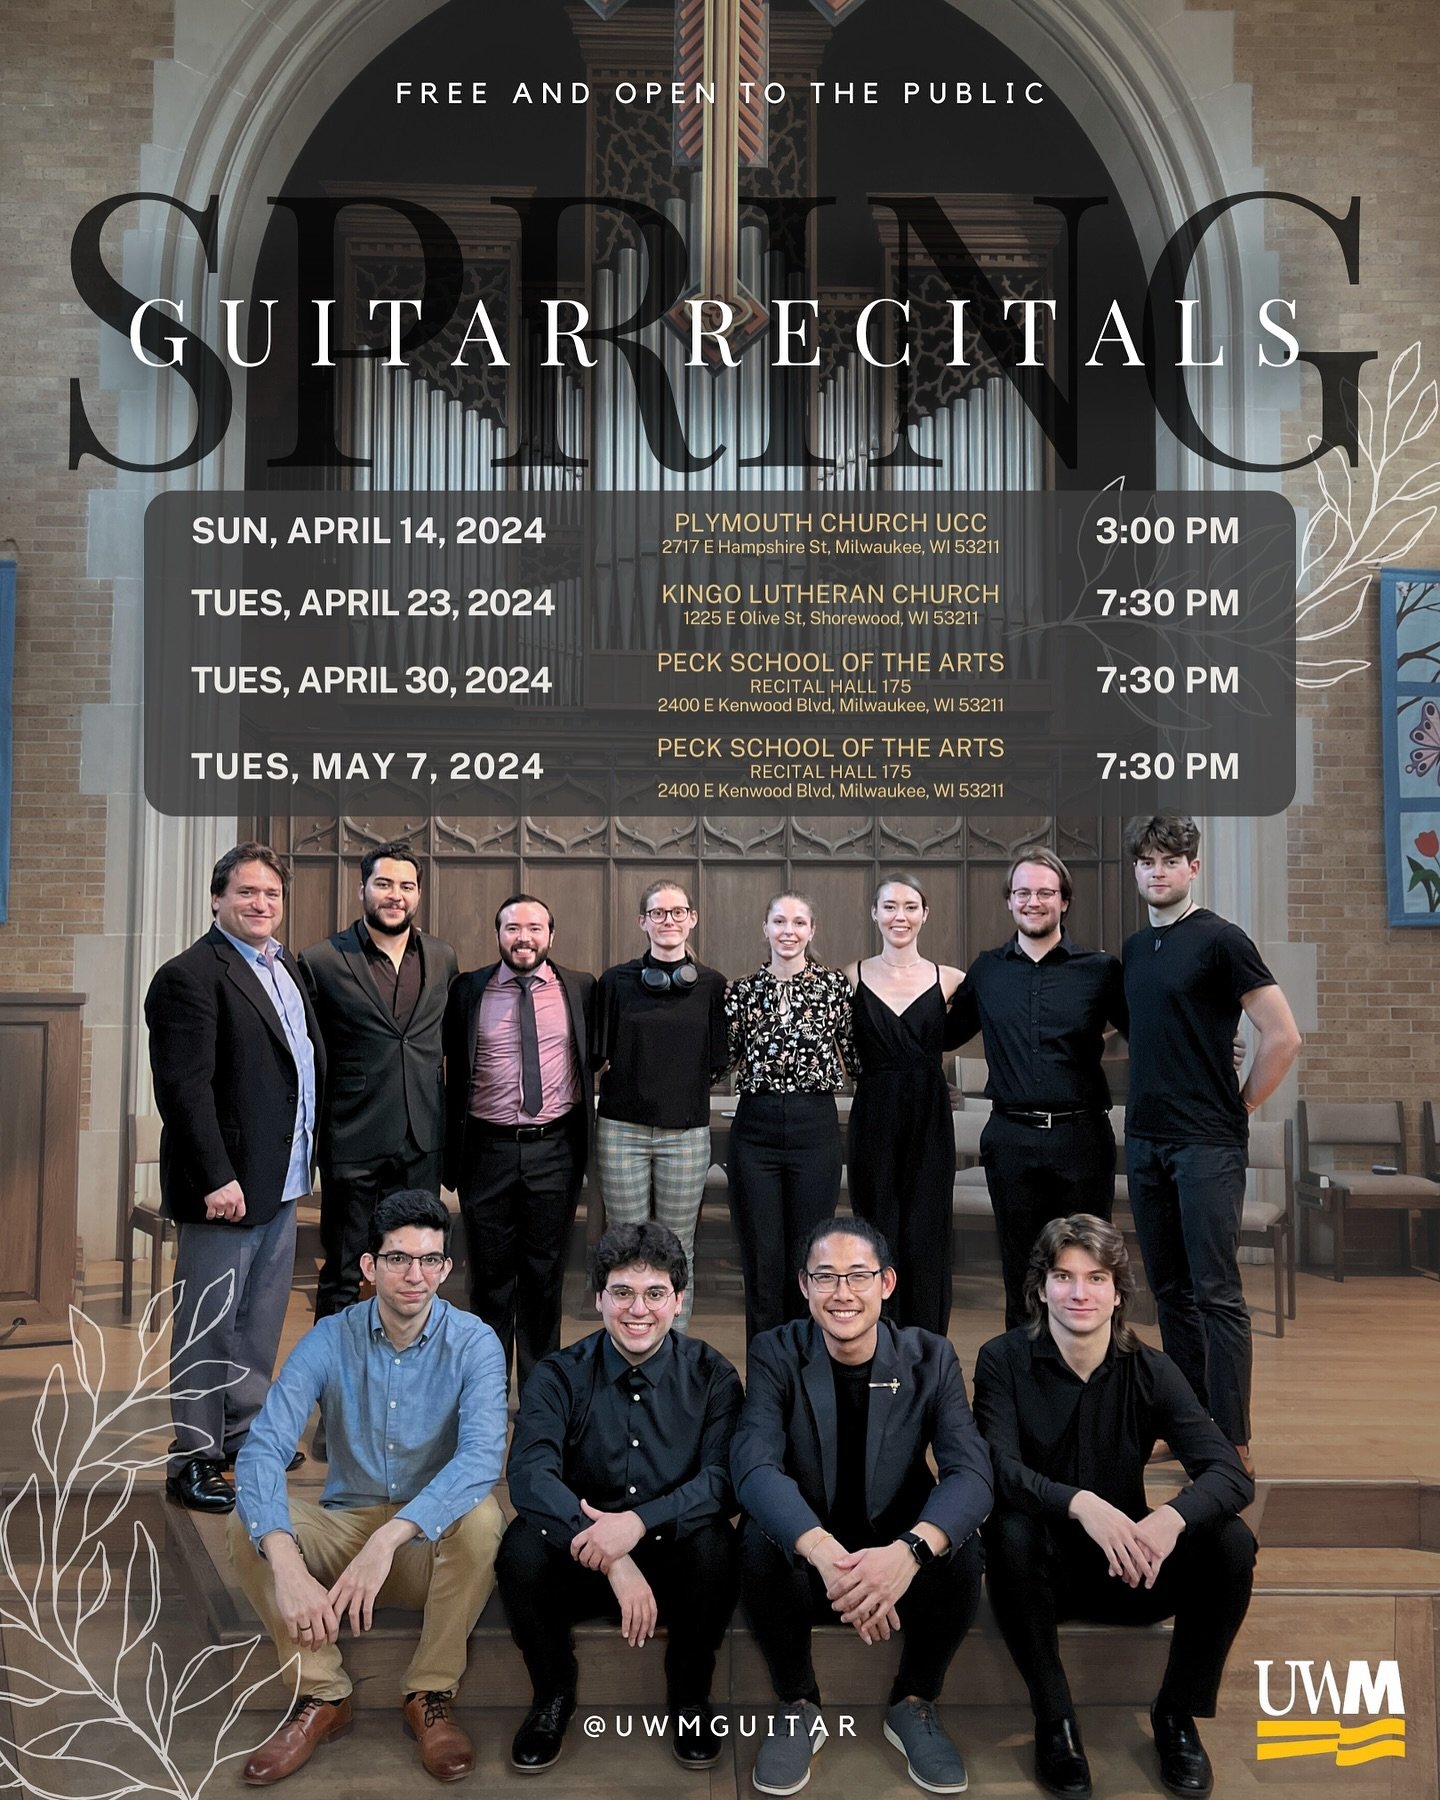 Our second studio recital of the spring semester is today! We are excited to share all of our hard work with you all!

Works by Villa-Lobos, Alb&eacute;niz, Regondi, Martin, Ayala, Dyens, Debussy, Del Rey, Walton, Ponce, Faur&eacute;, and more!!

- T